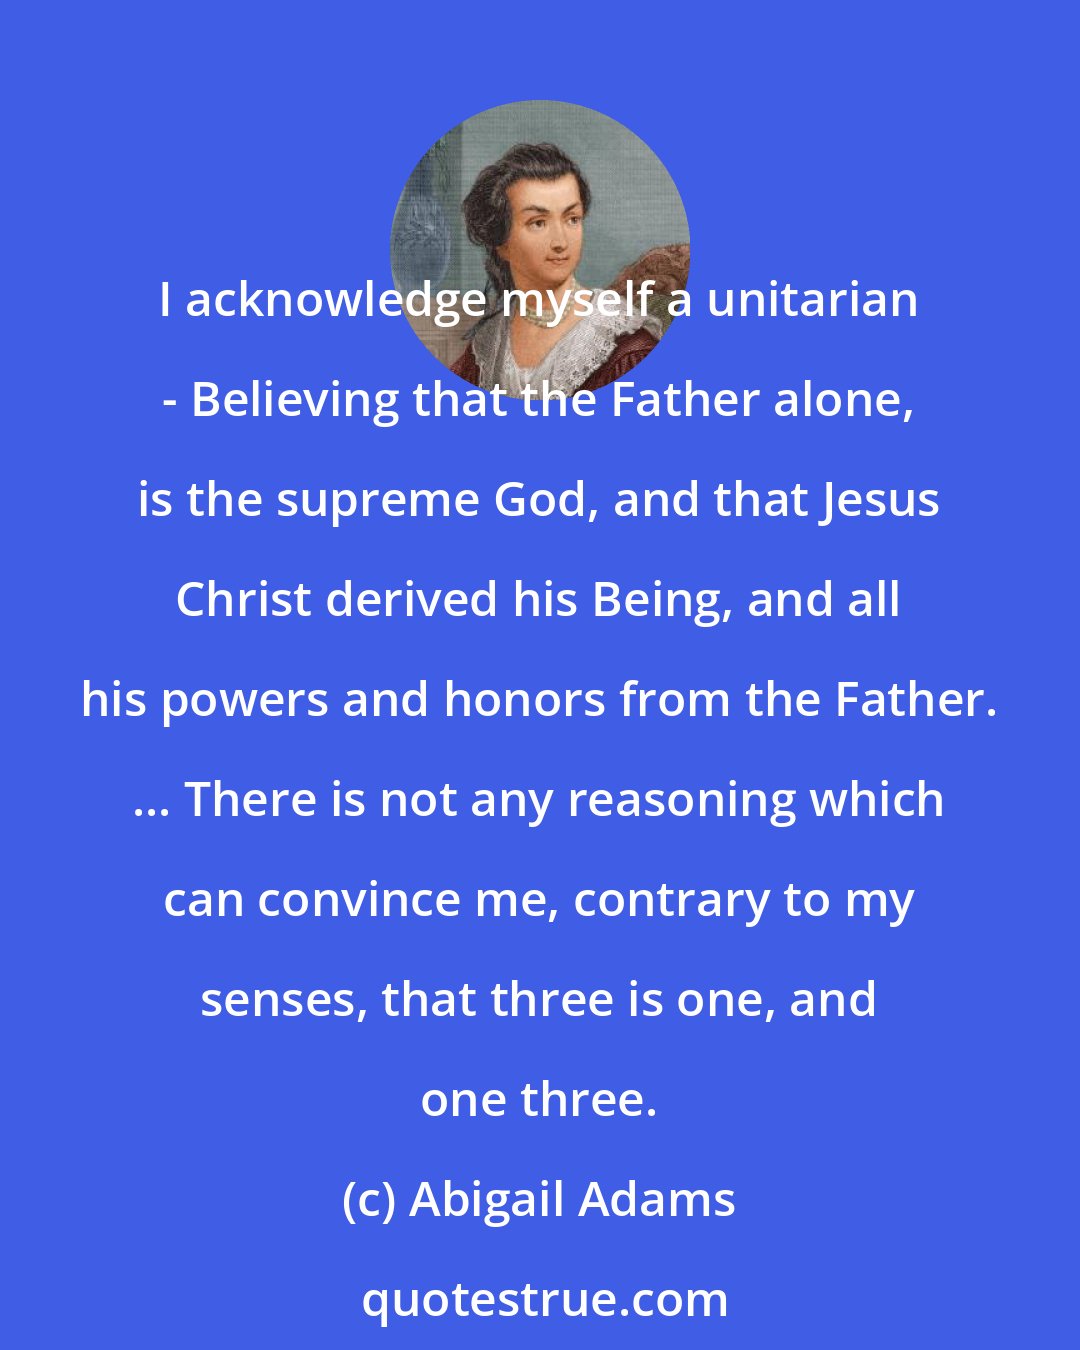 Abigail Adams: I acknowledge myself a unitarian - Believing that the Father alone, is the supreme God, and that Jesus Christ derived his Being, and all his powers and honors from the Father. ... There is not any reasoning which can convince me, contrary to my senses, that three is one, and one three.